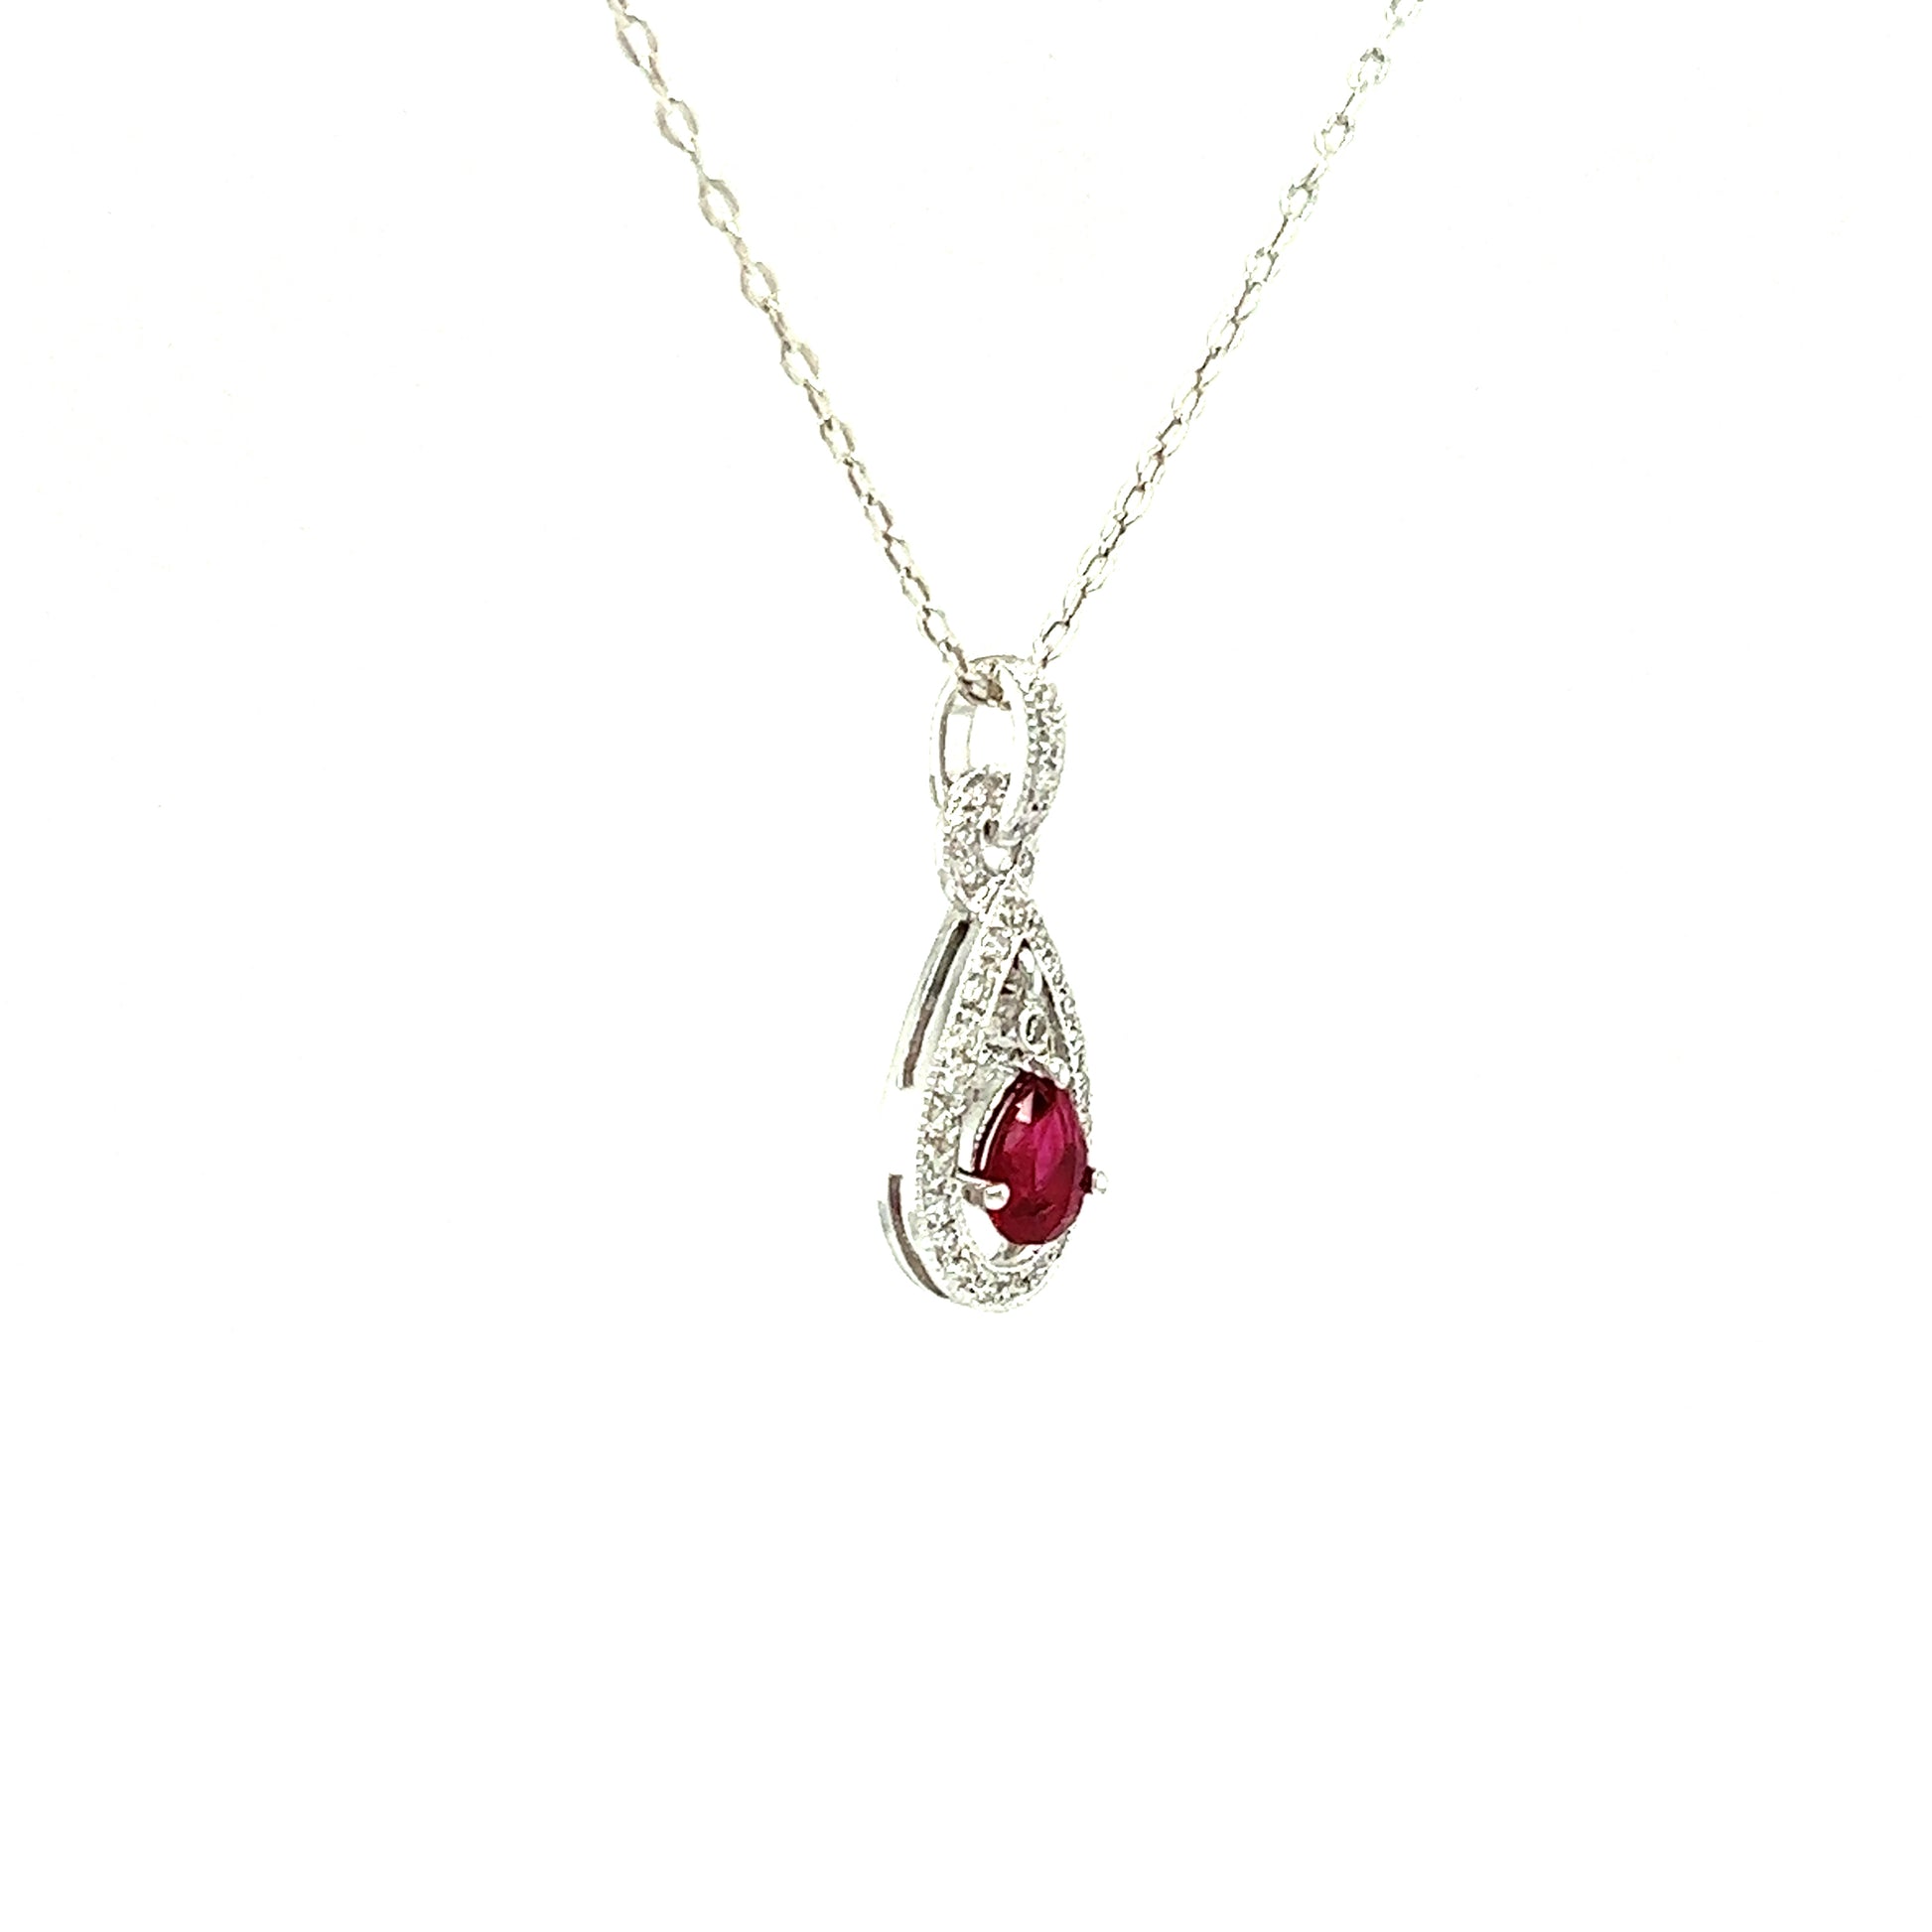 Dangling Pear Ruby Pendant with Diamond Accents in 14K White Gold Pendant and Chain Left Side View